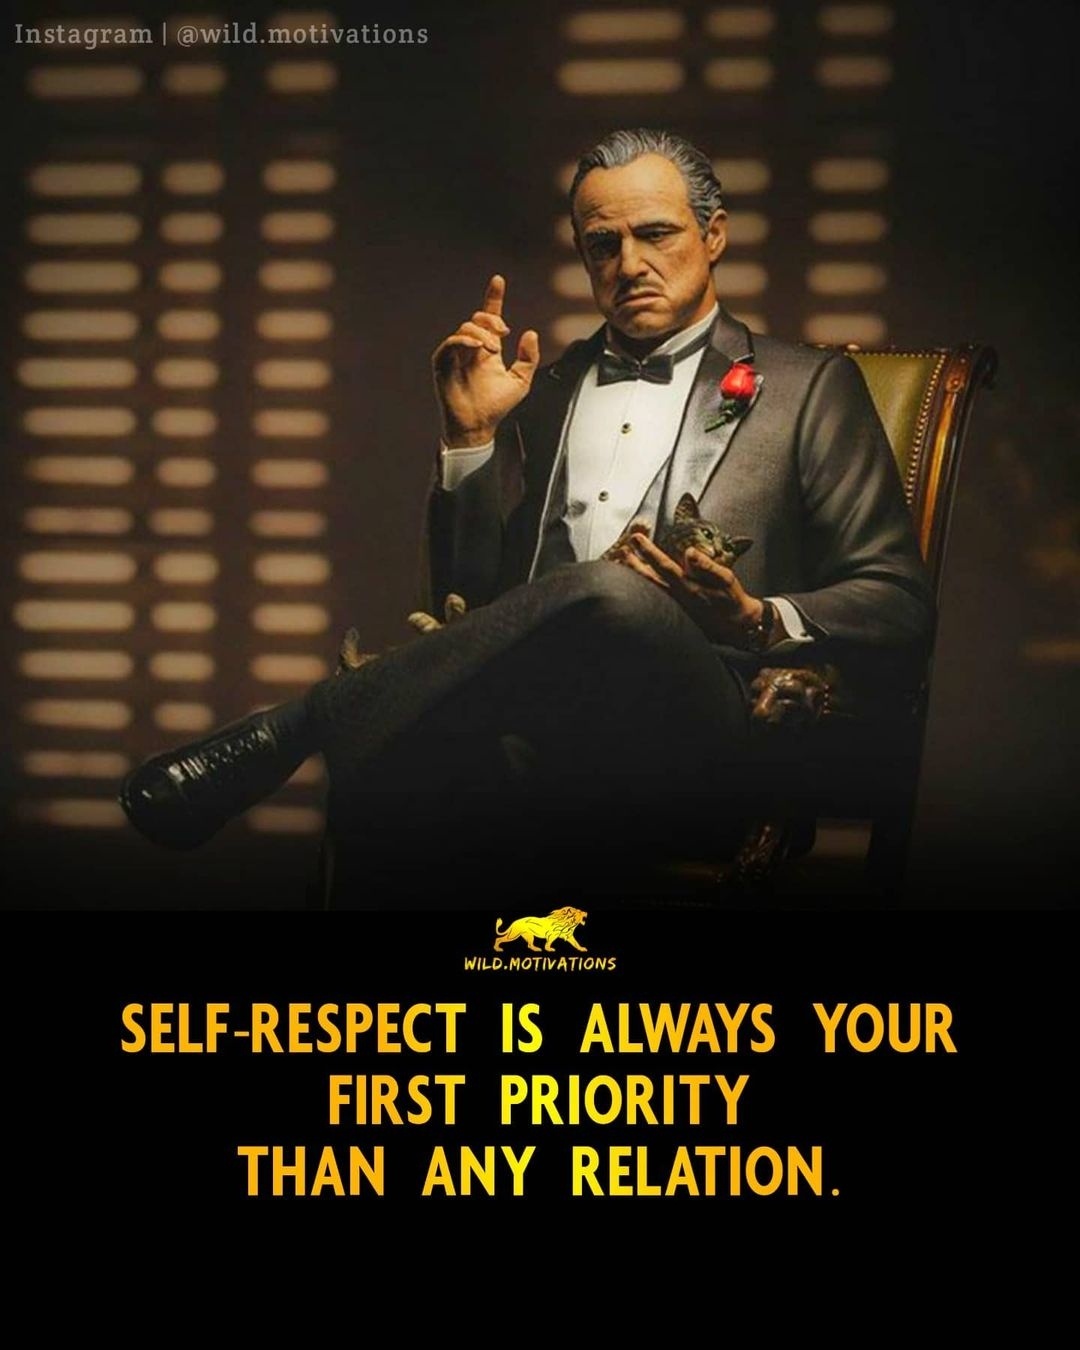 Self respect is always your first priority than any relation.